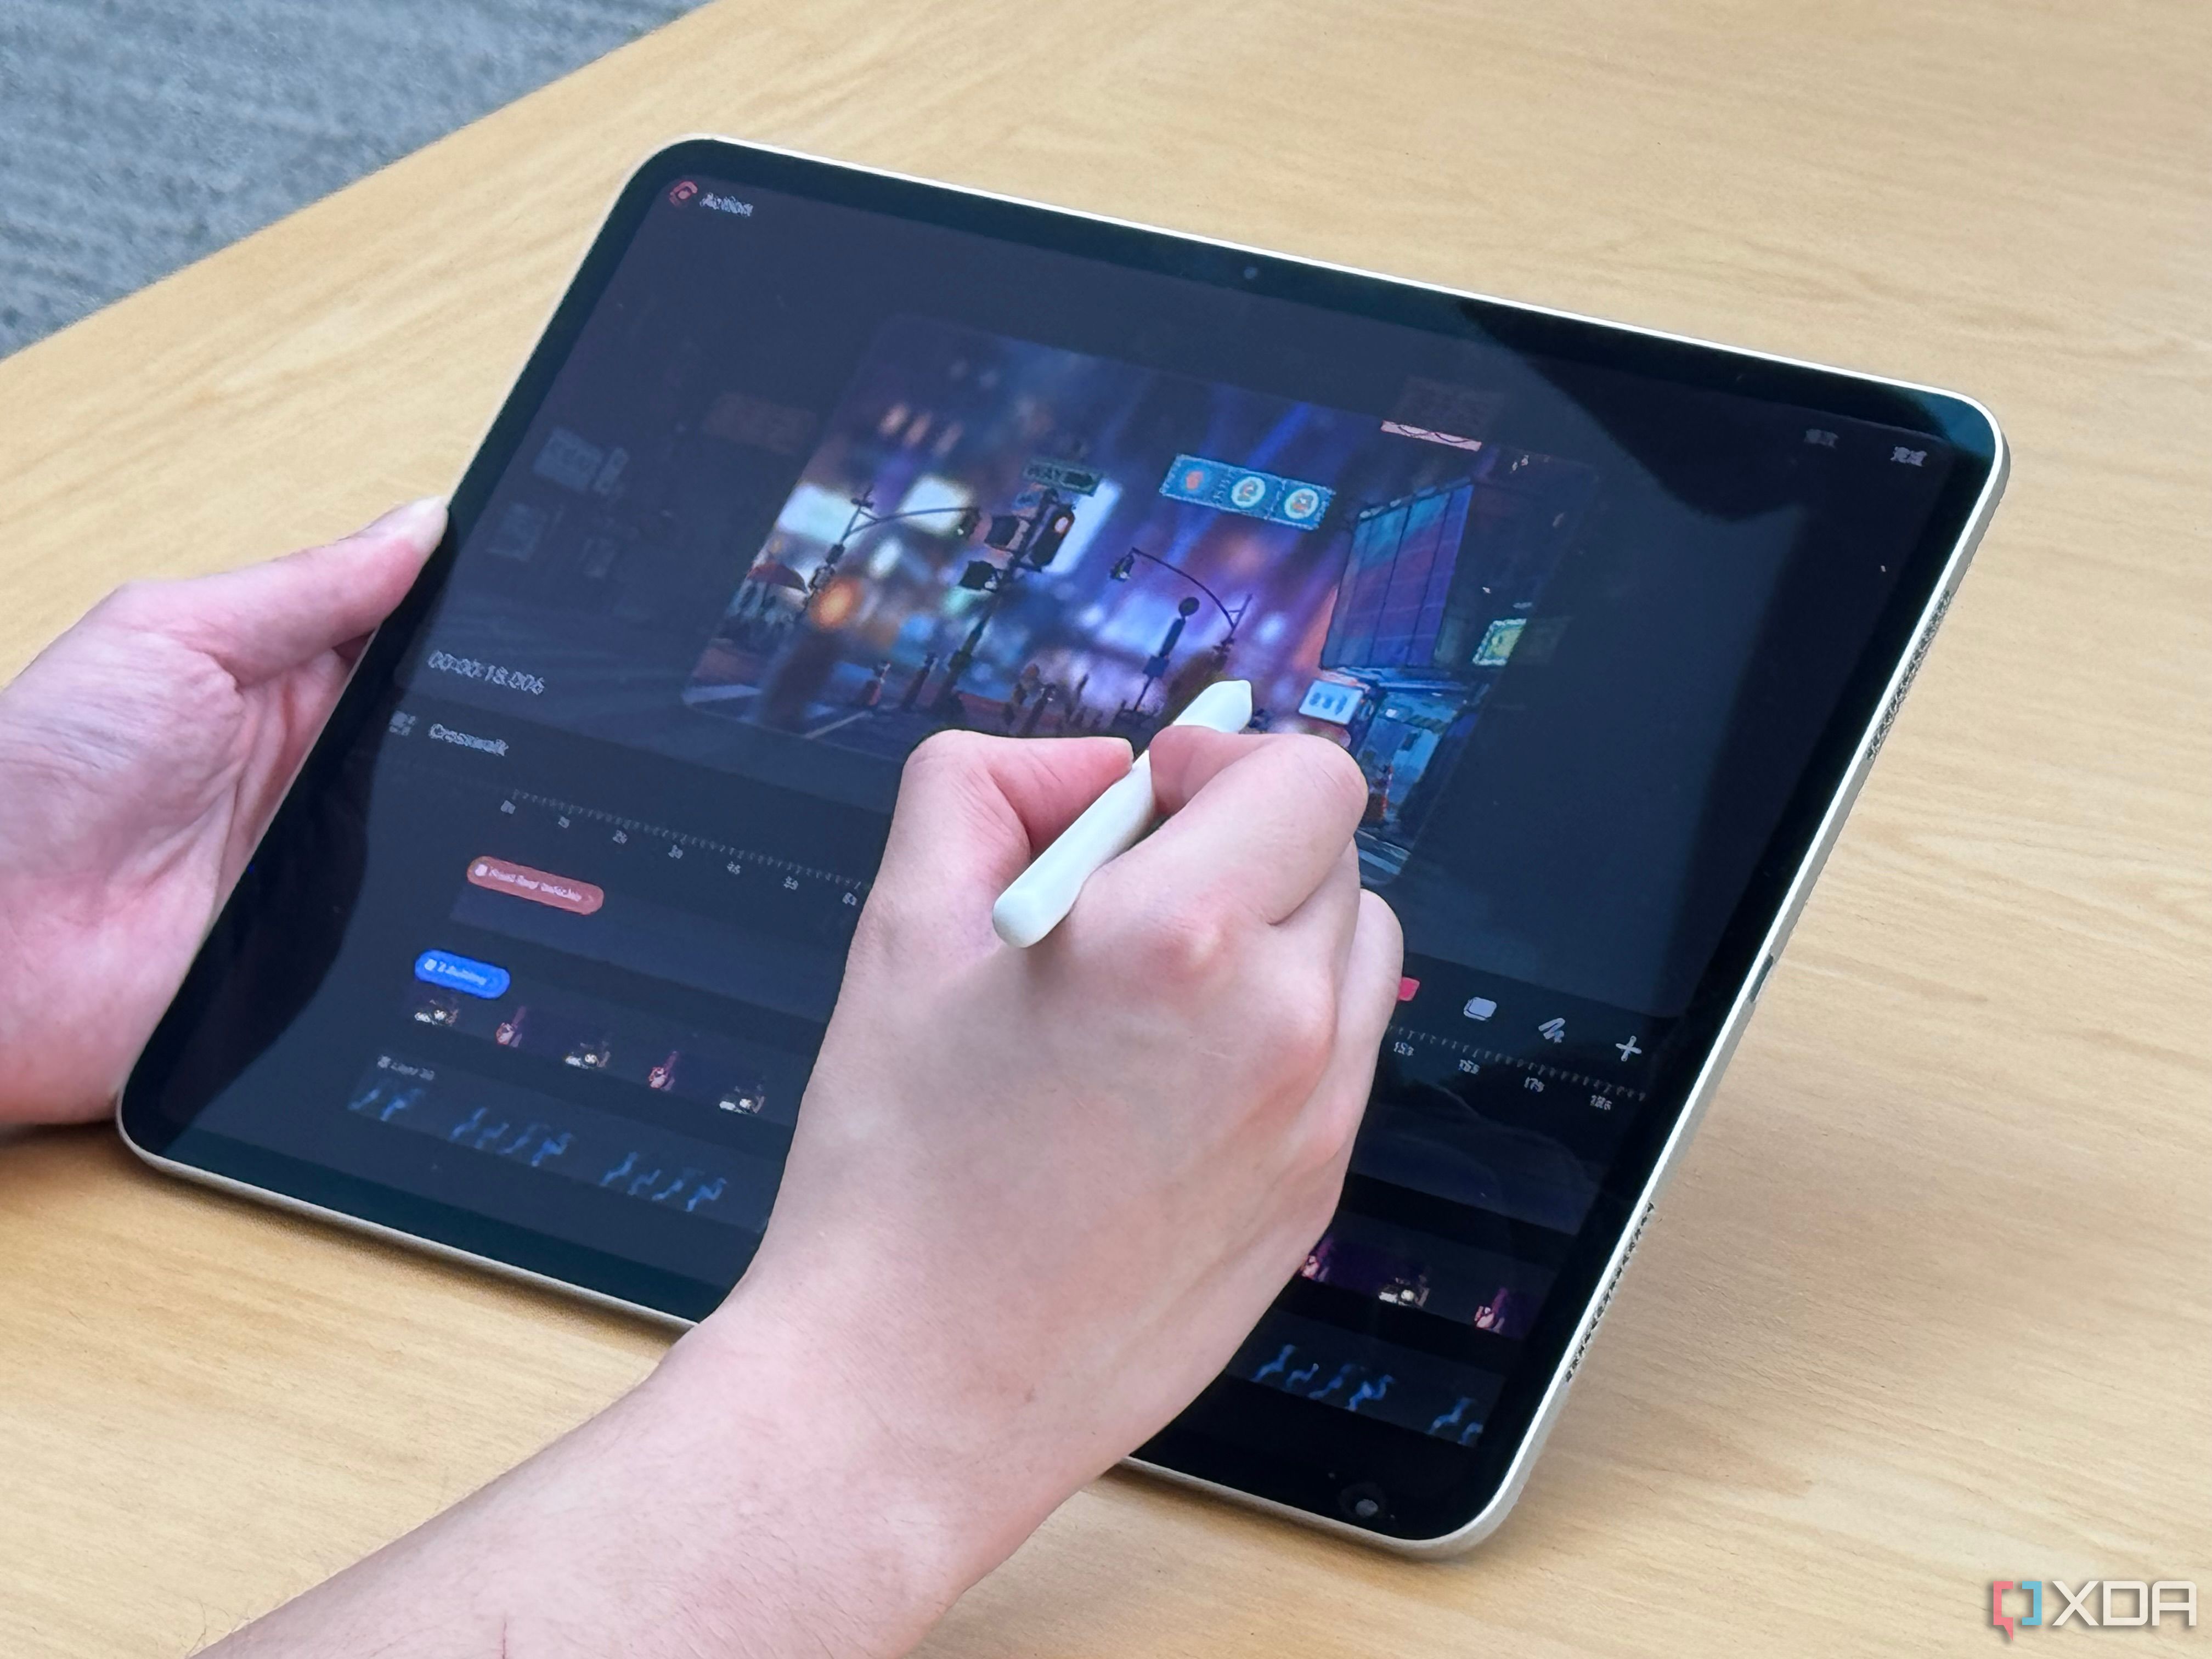 iPad Pro (M4) hands-on: Real upgrades across the board